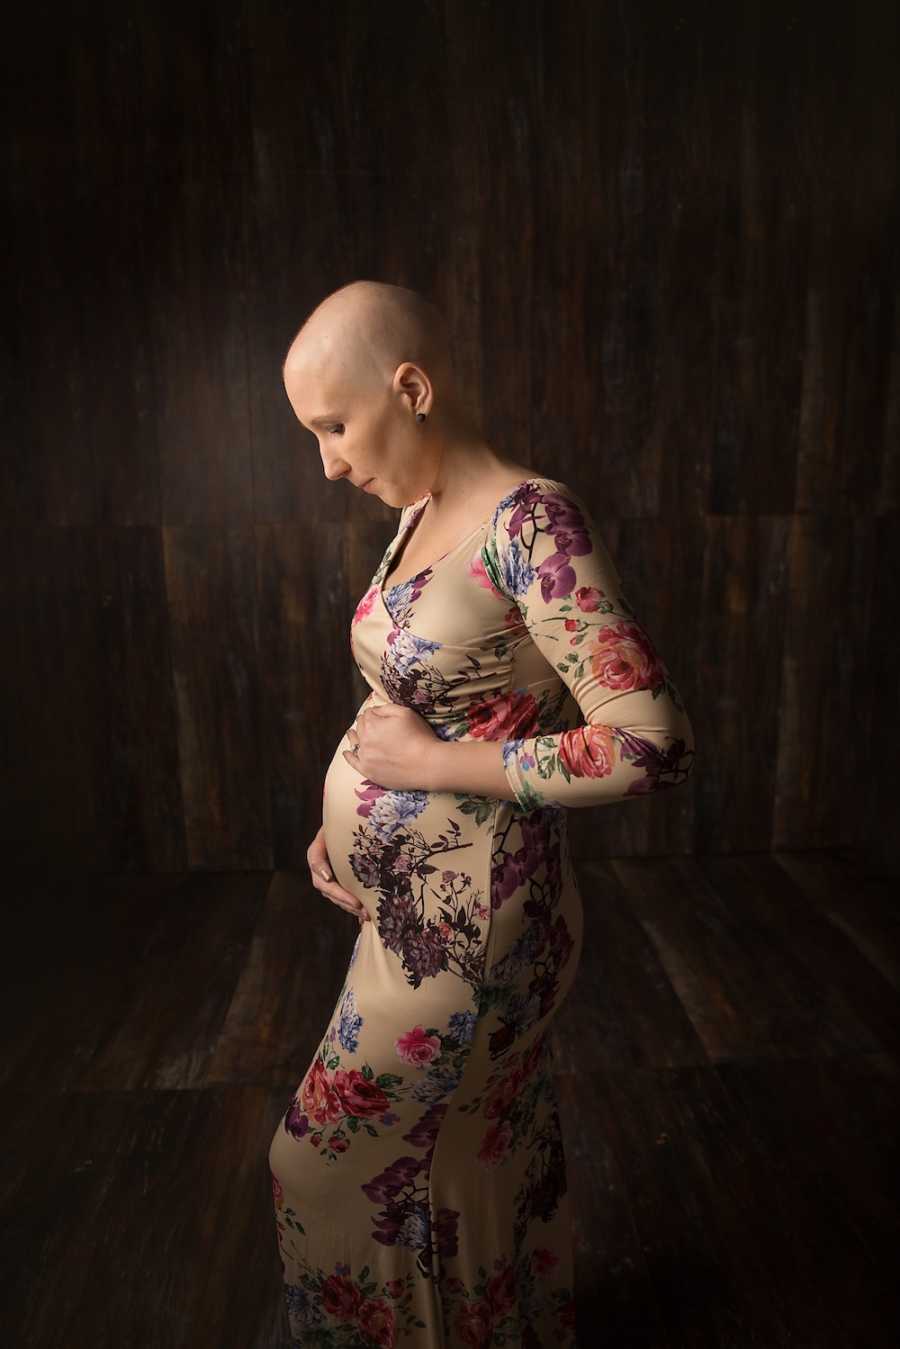 Woman with breast cancer stands holding her stomach in floral dress